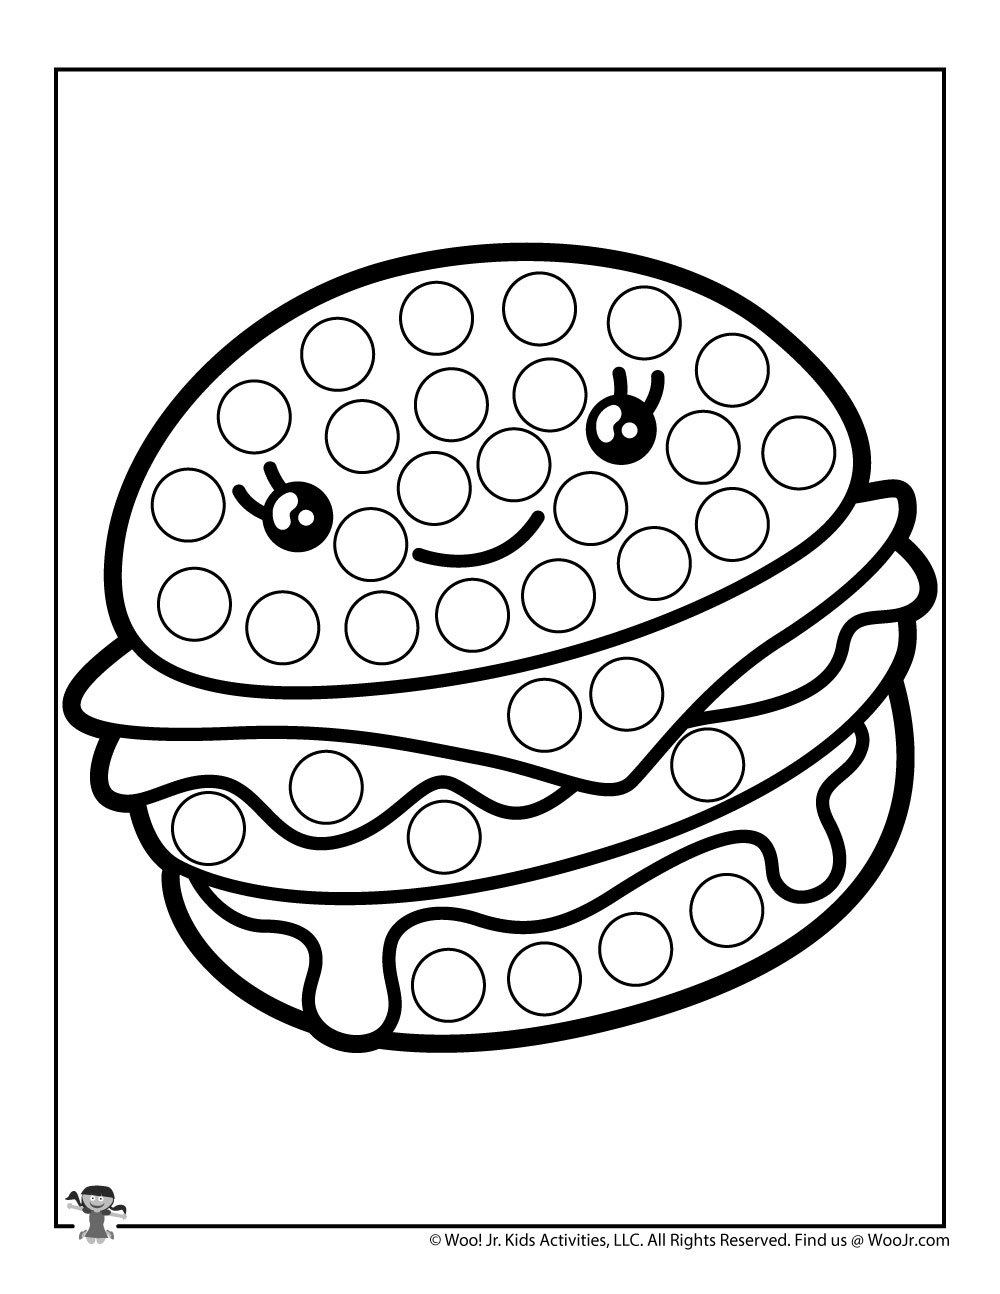 Happy Burger Food Do a Dot Art Coloring Pages | Woo! Jr. Kids Activities :  Children's Publishing